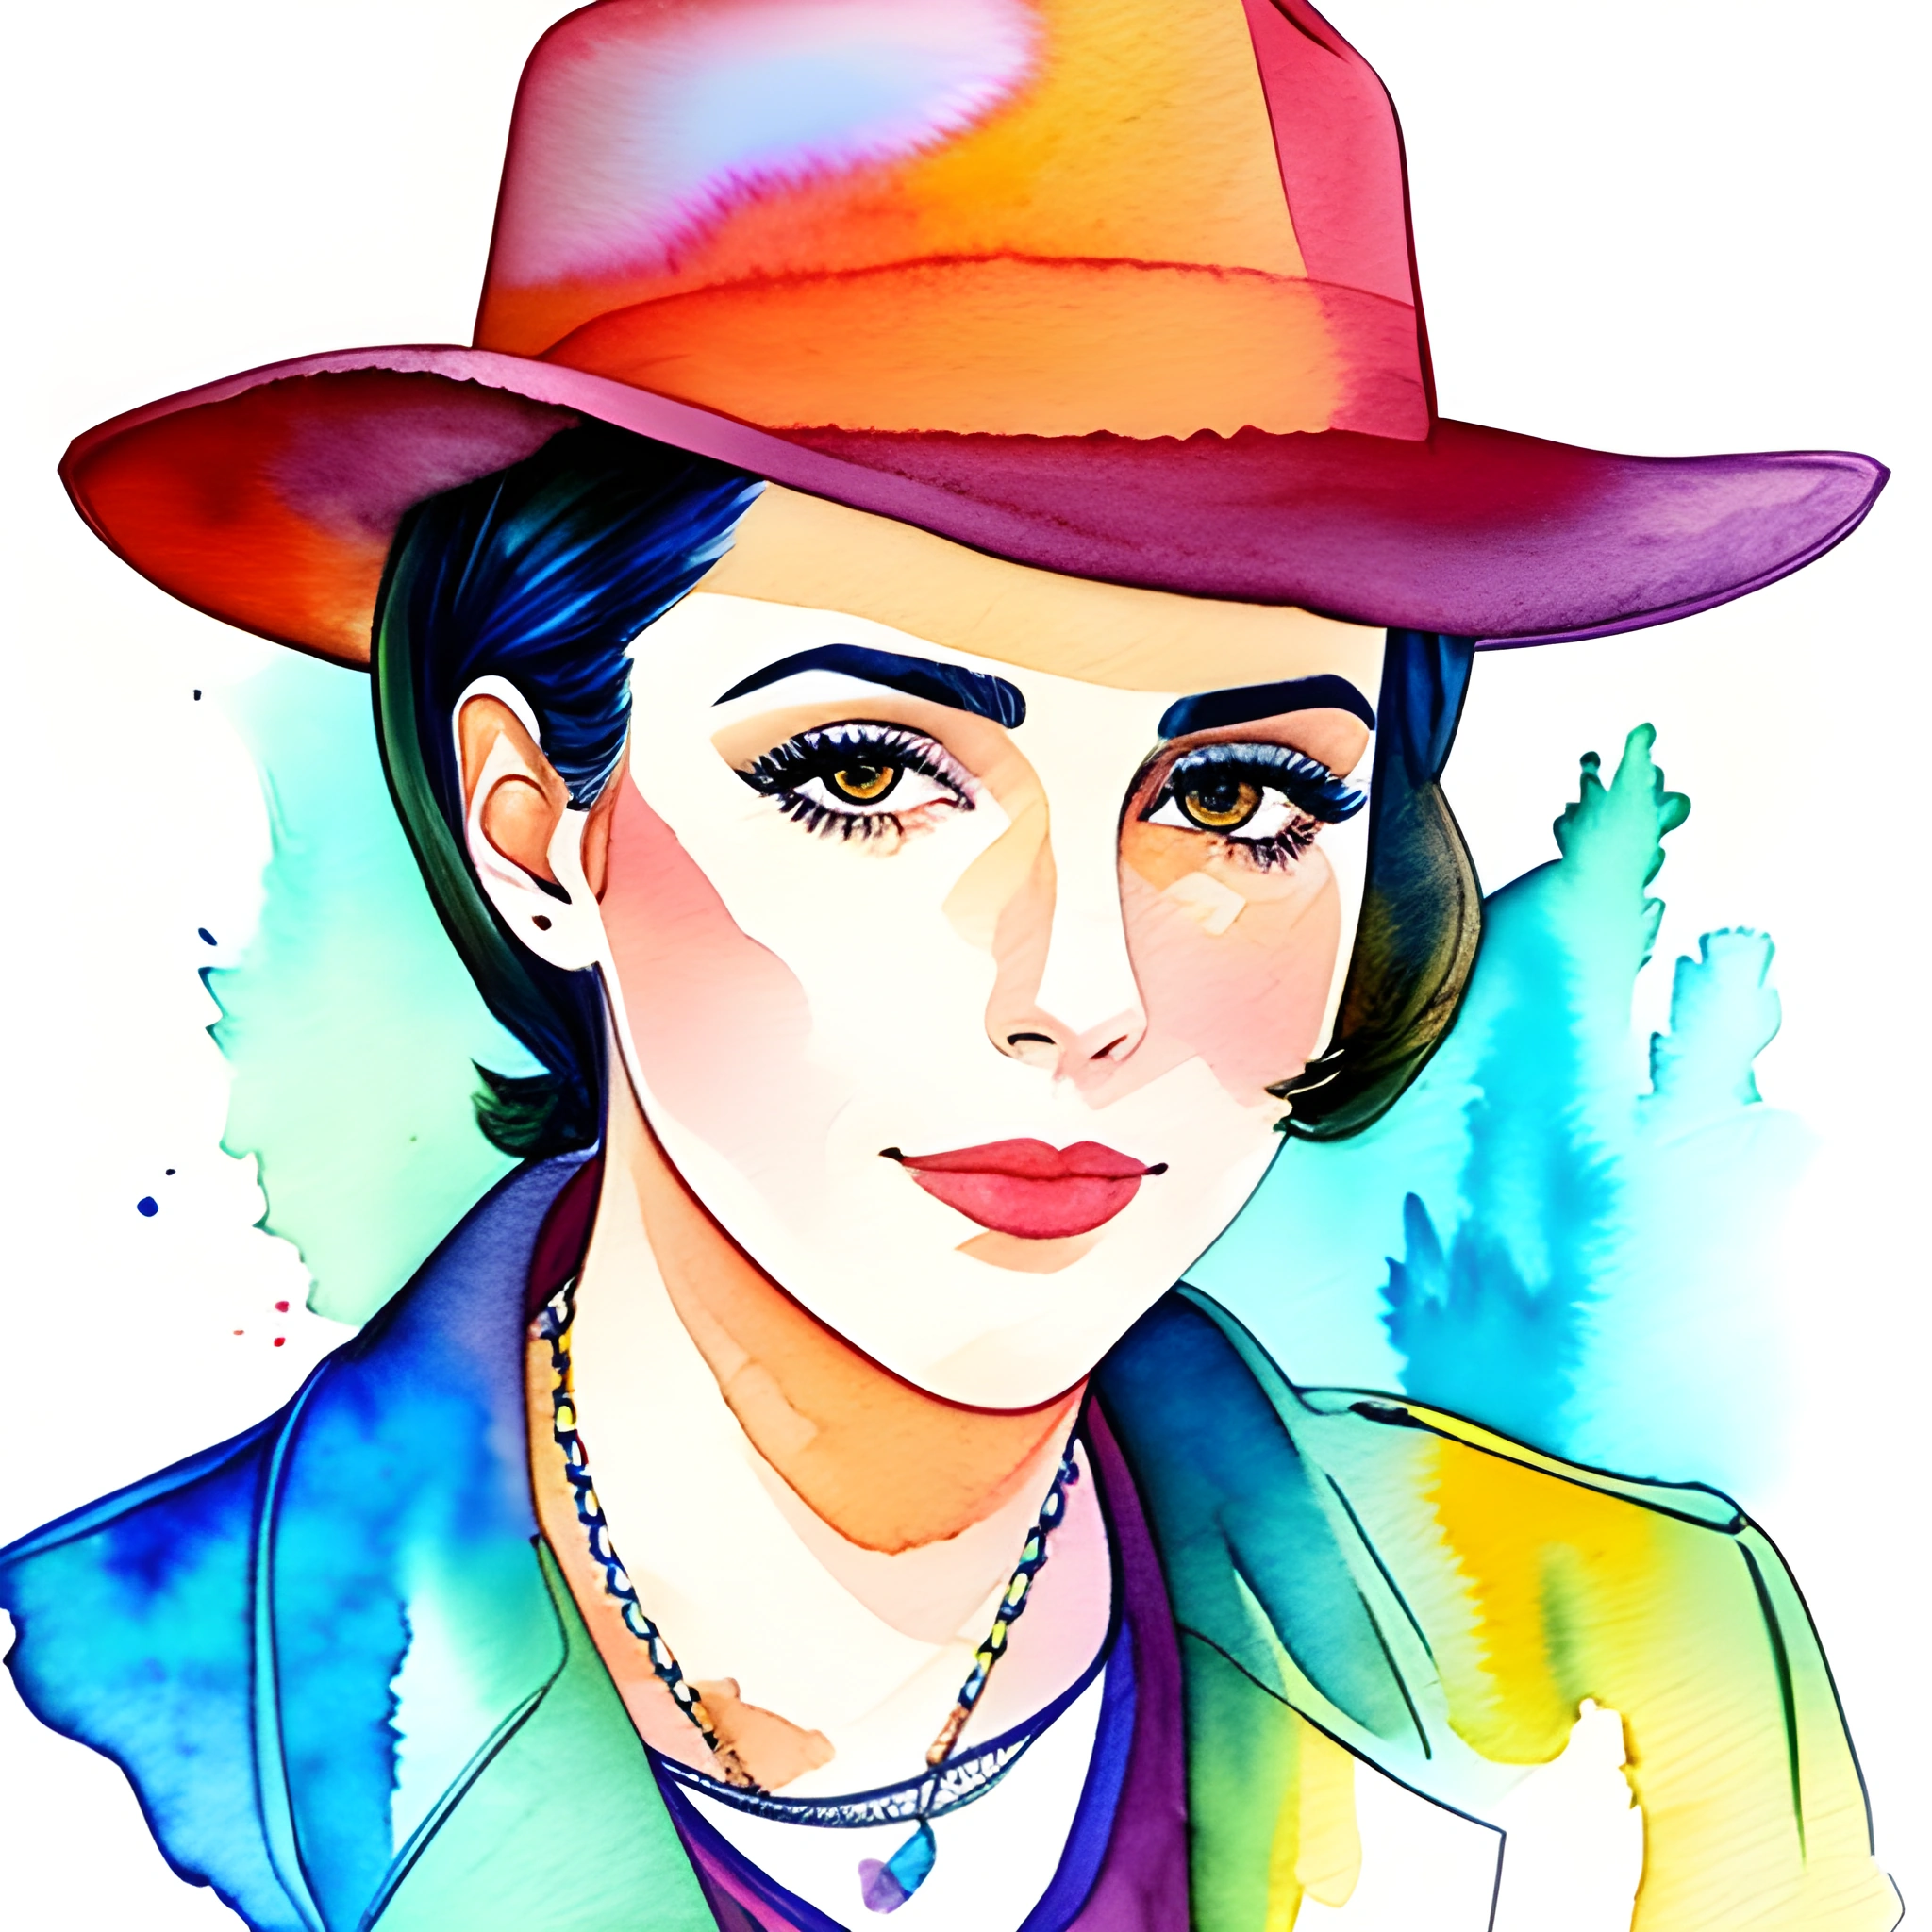 painting of a woman wearing a hat and a necklace